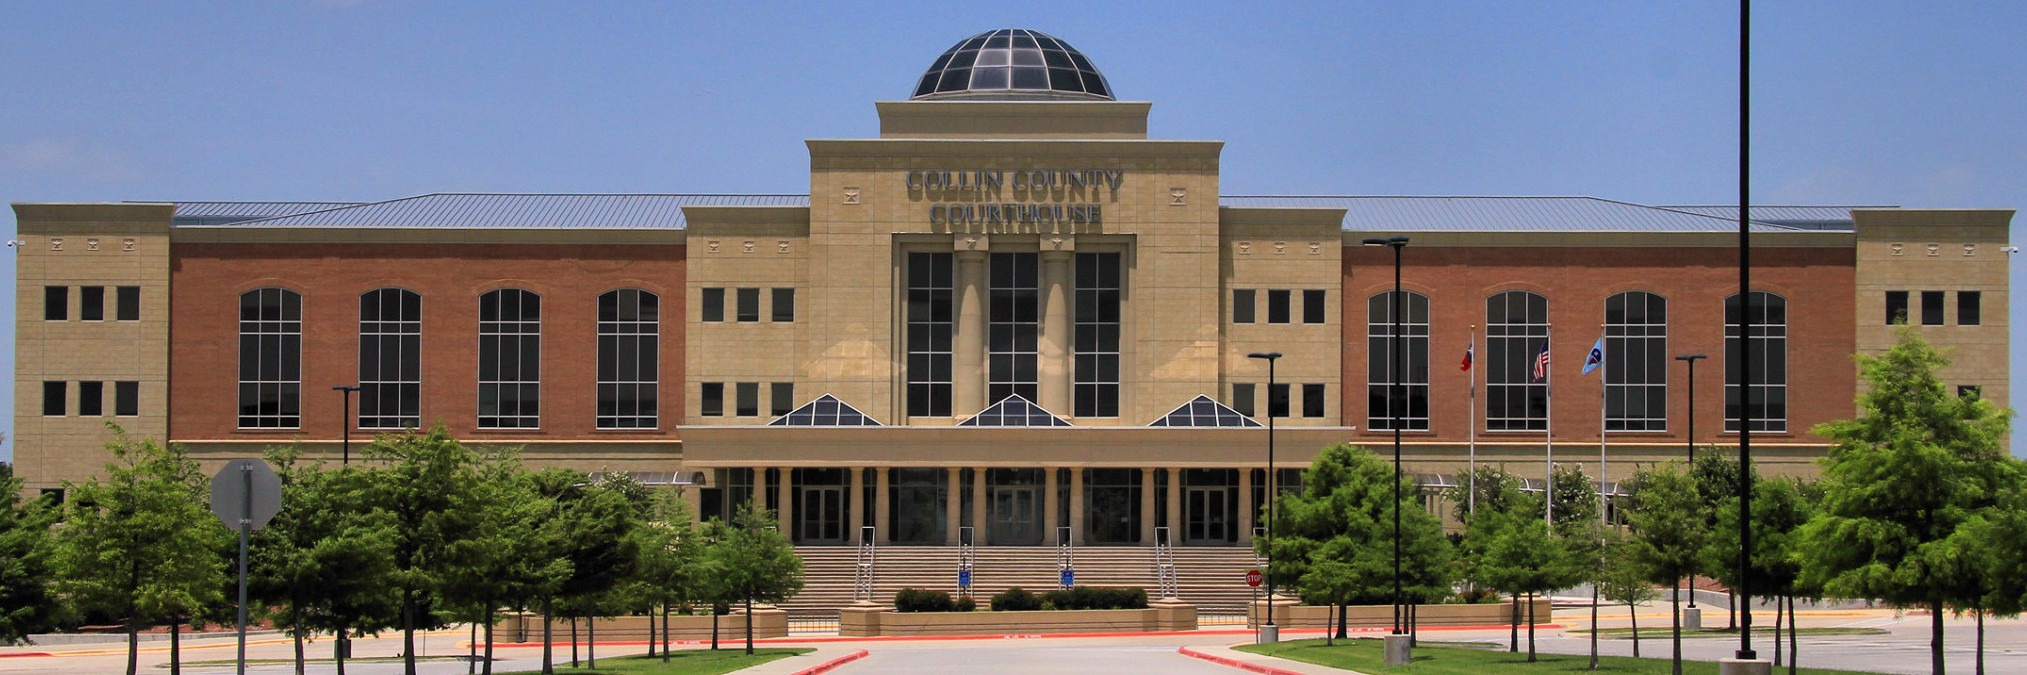 Collin County TX Courthouse | Collin County Property Management